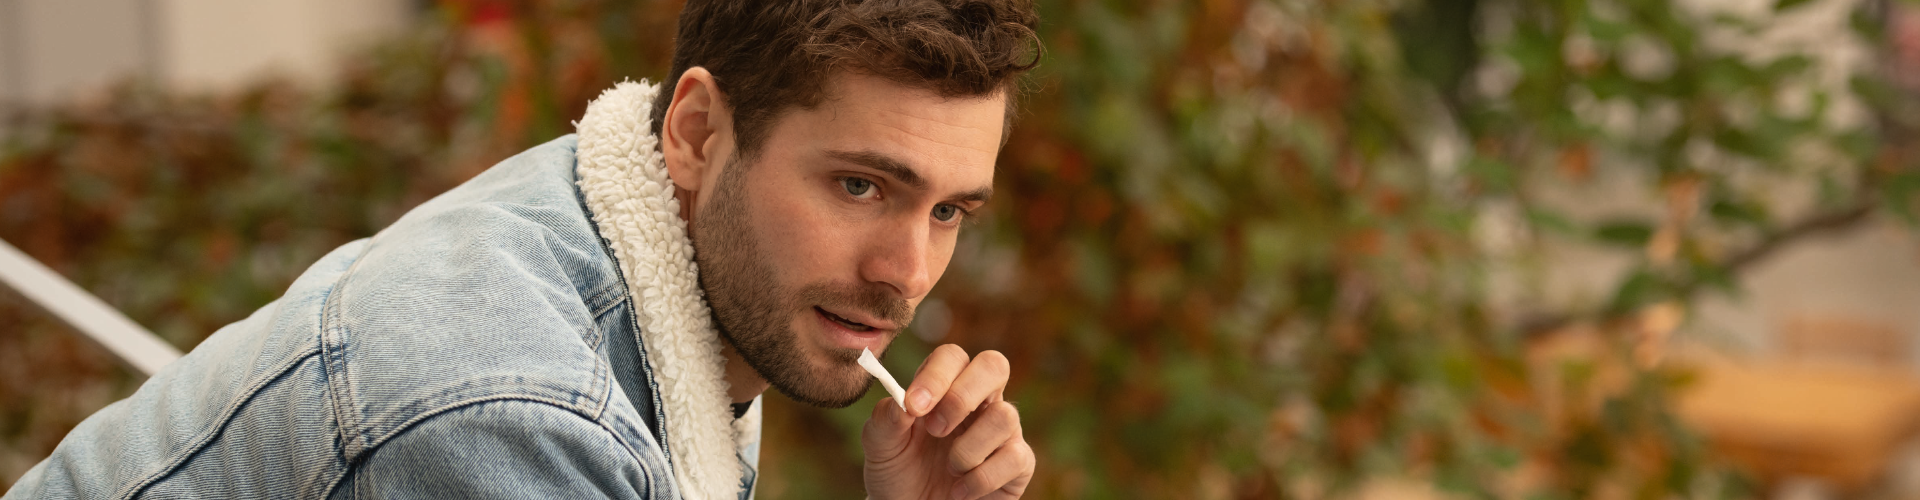 A man takes a nicotine sachet while sitting on a bench